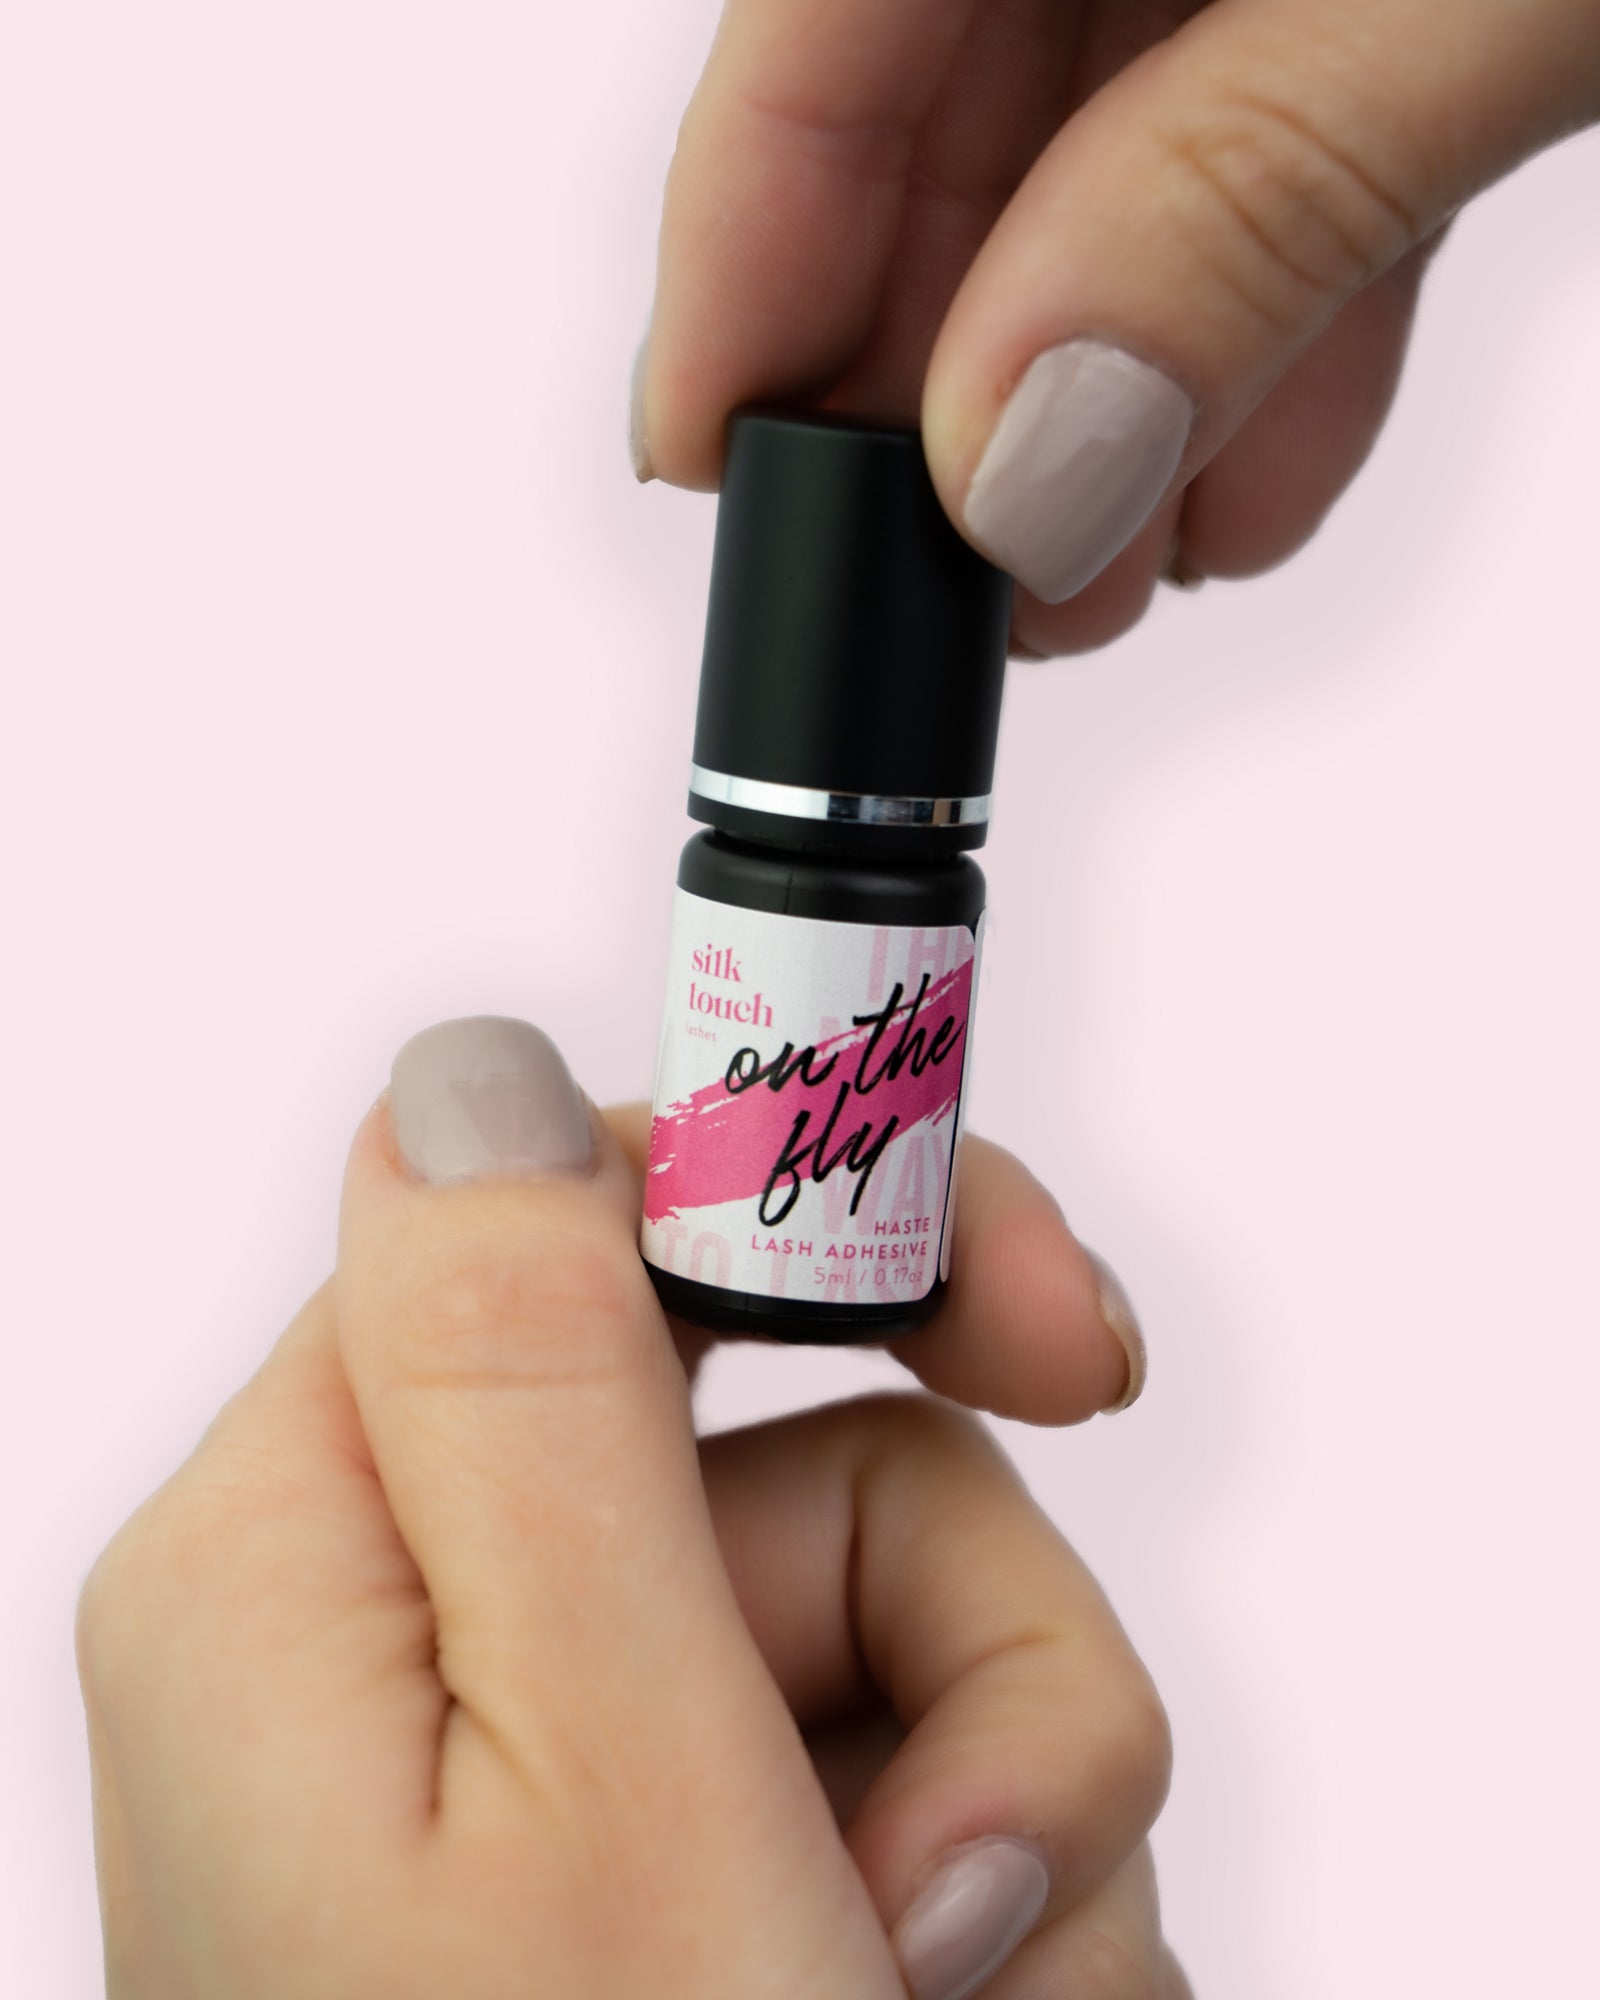 Touchedbymysty lace glue (reg. 38 ml) | TOUCHED BY MYSTY